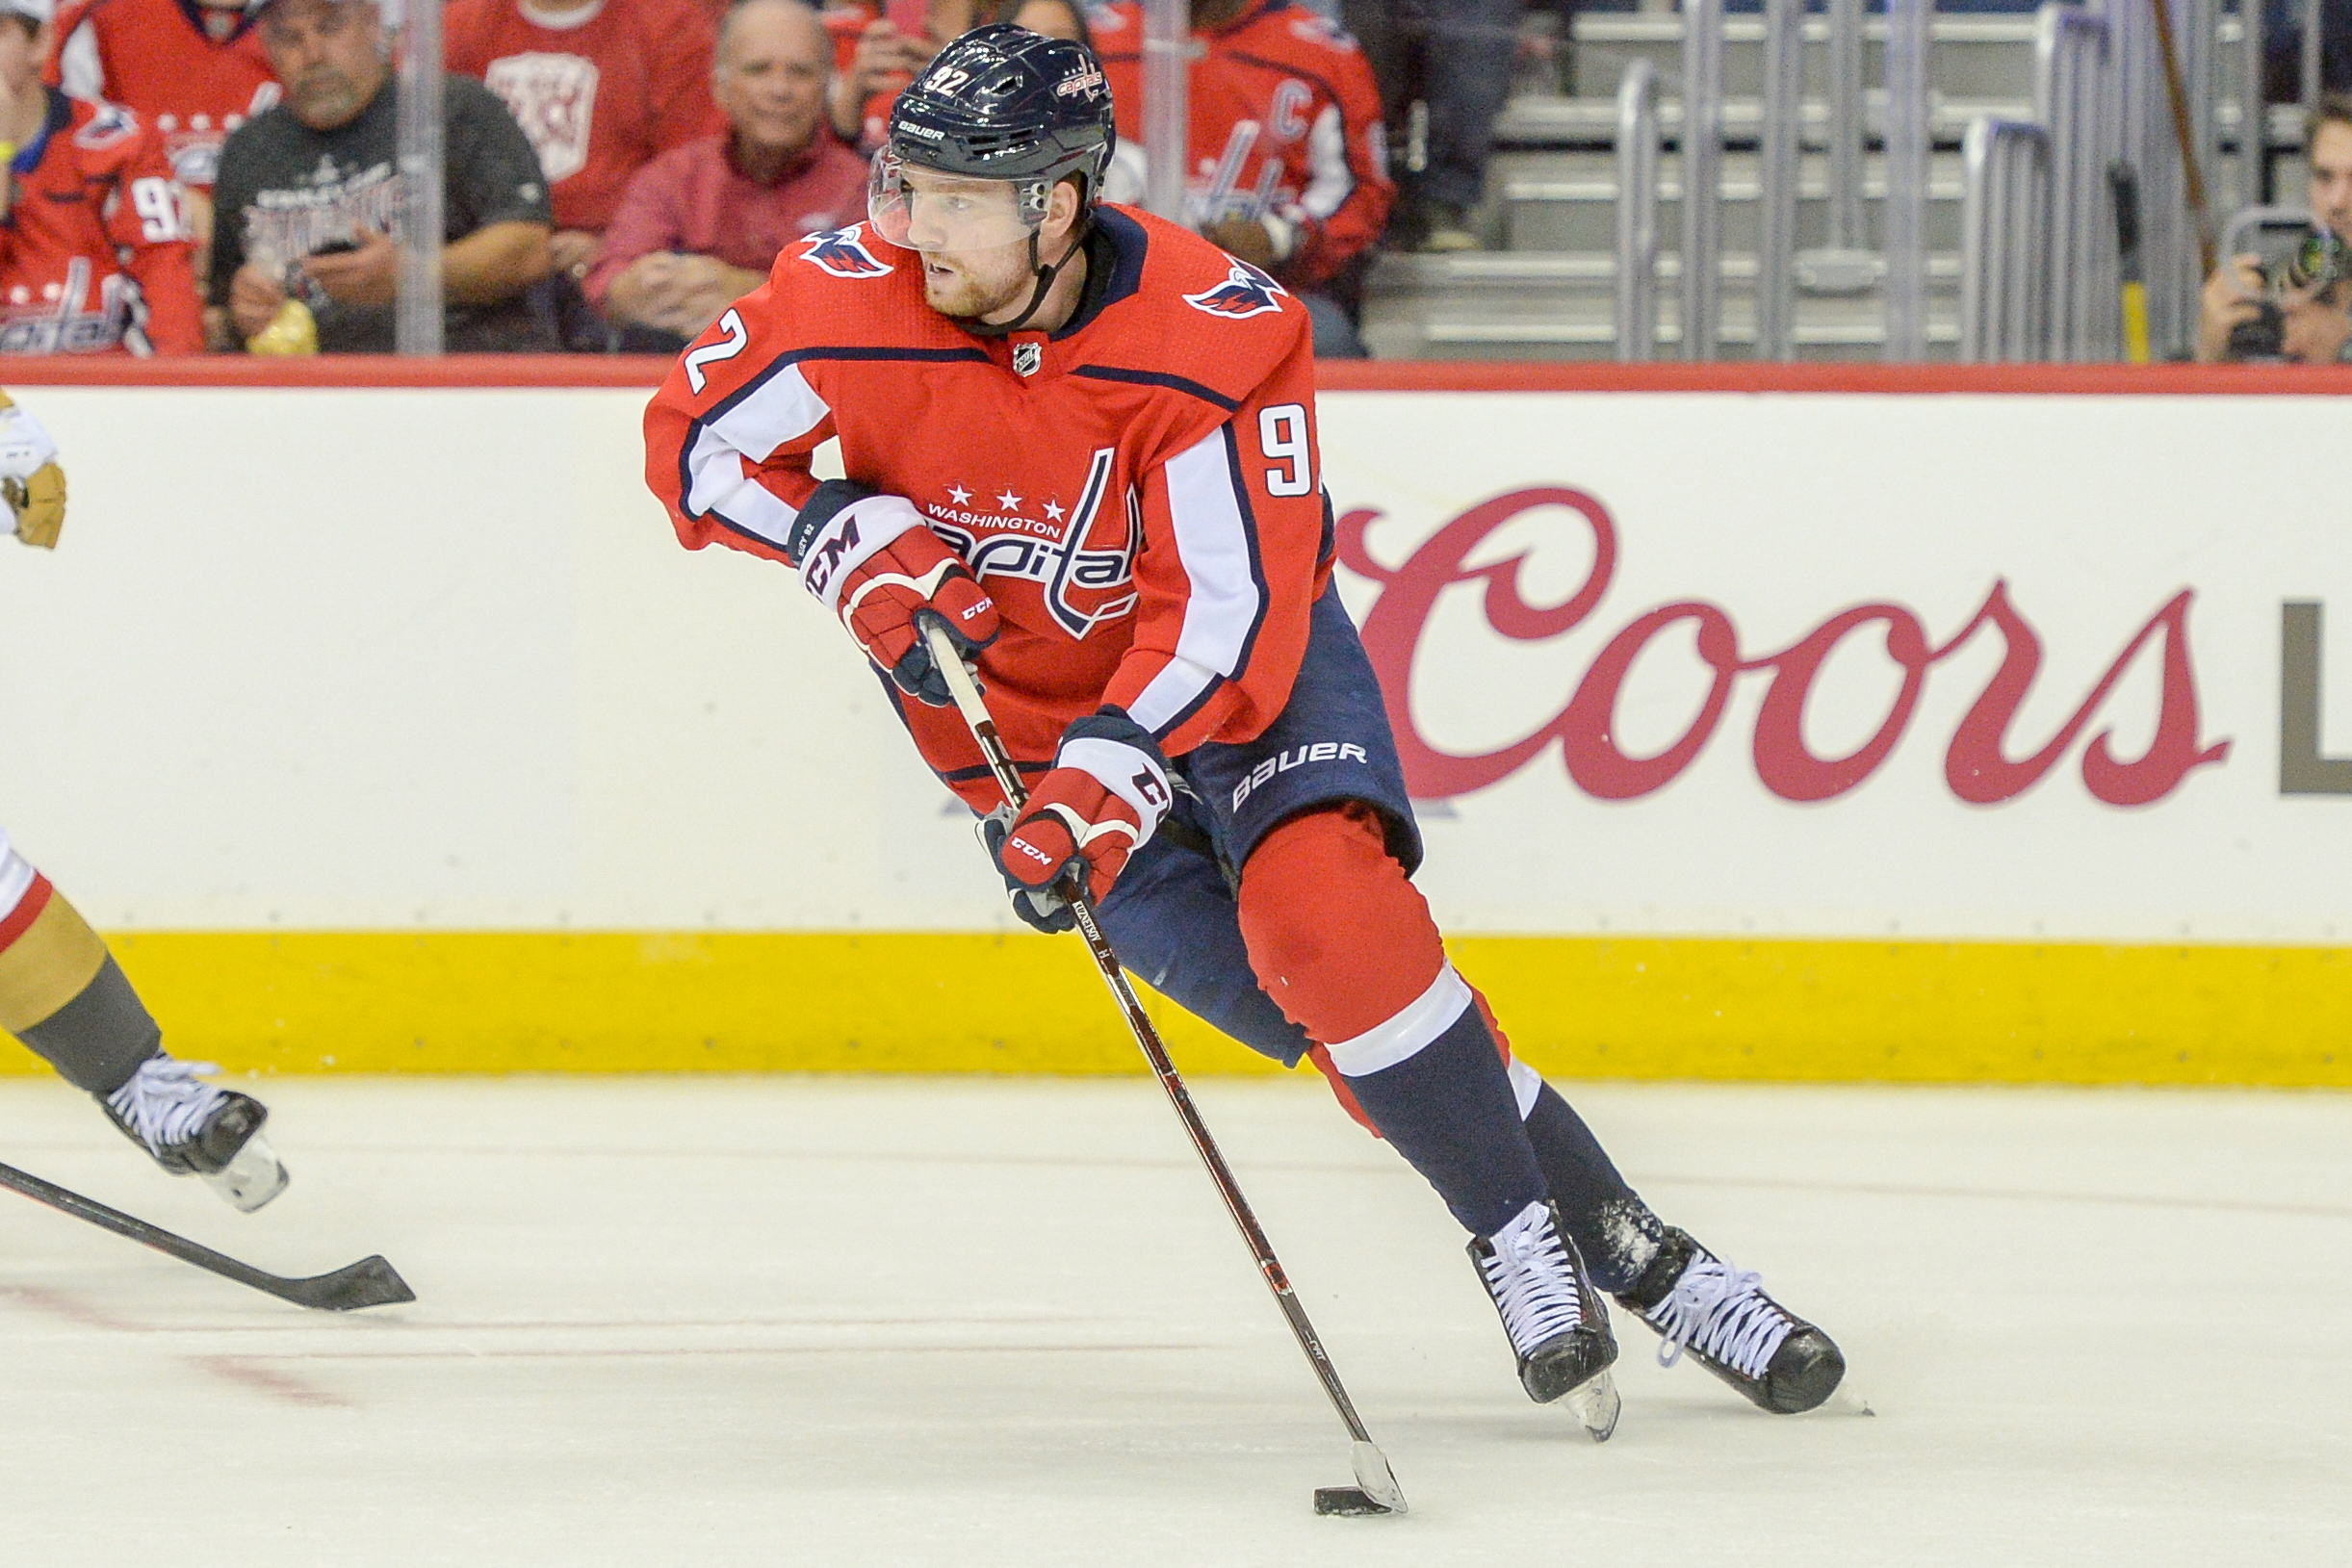 Kuznetsov's future with the Capitals has been in question amid trade speculation.